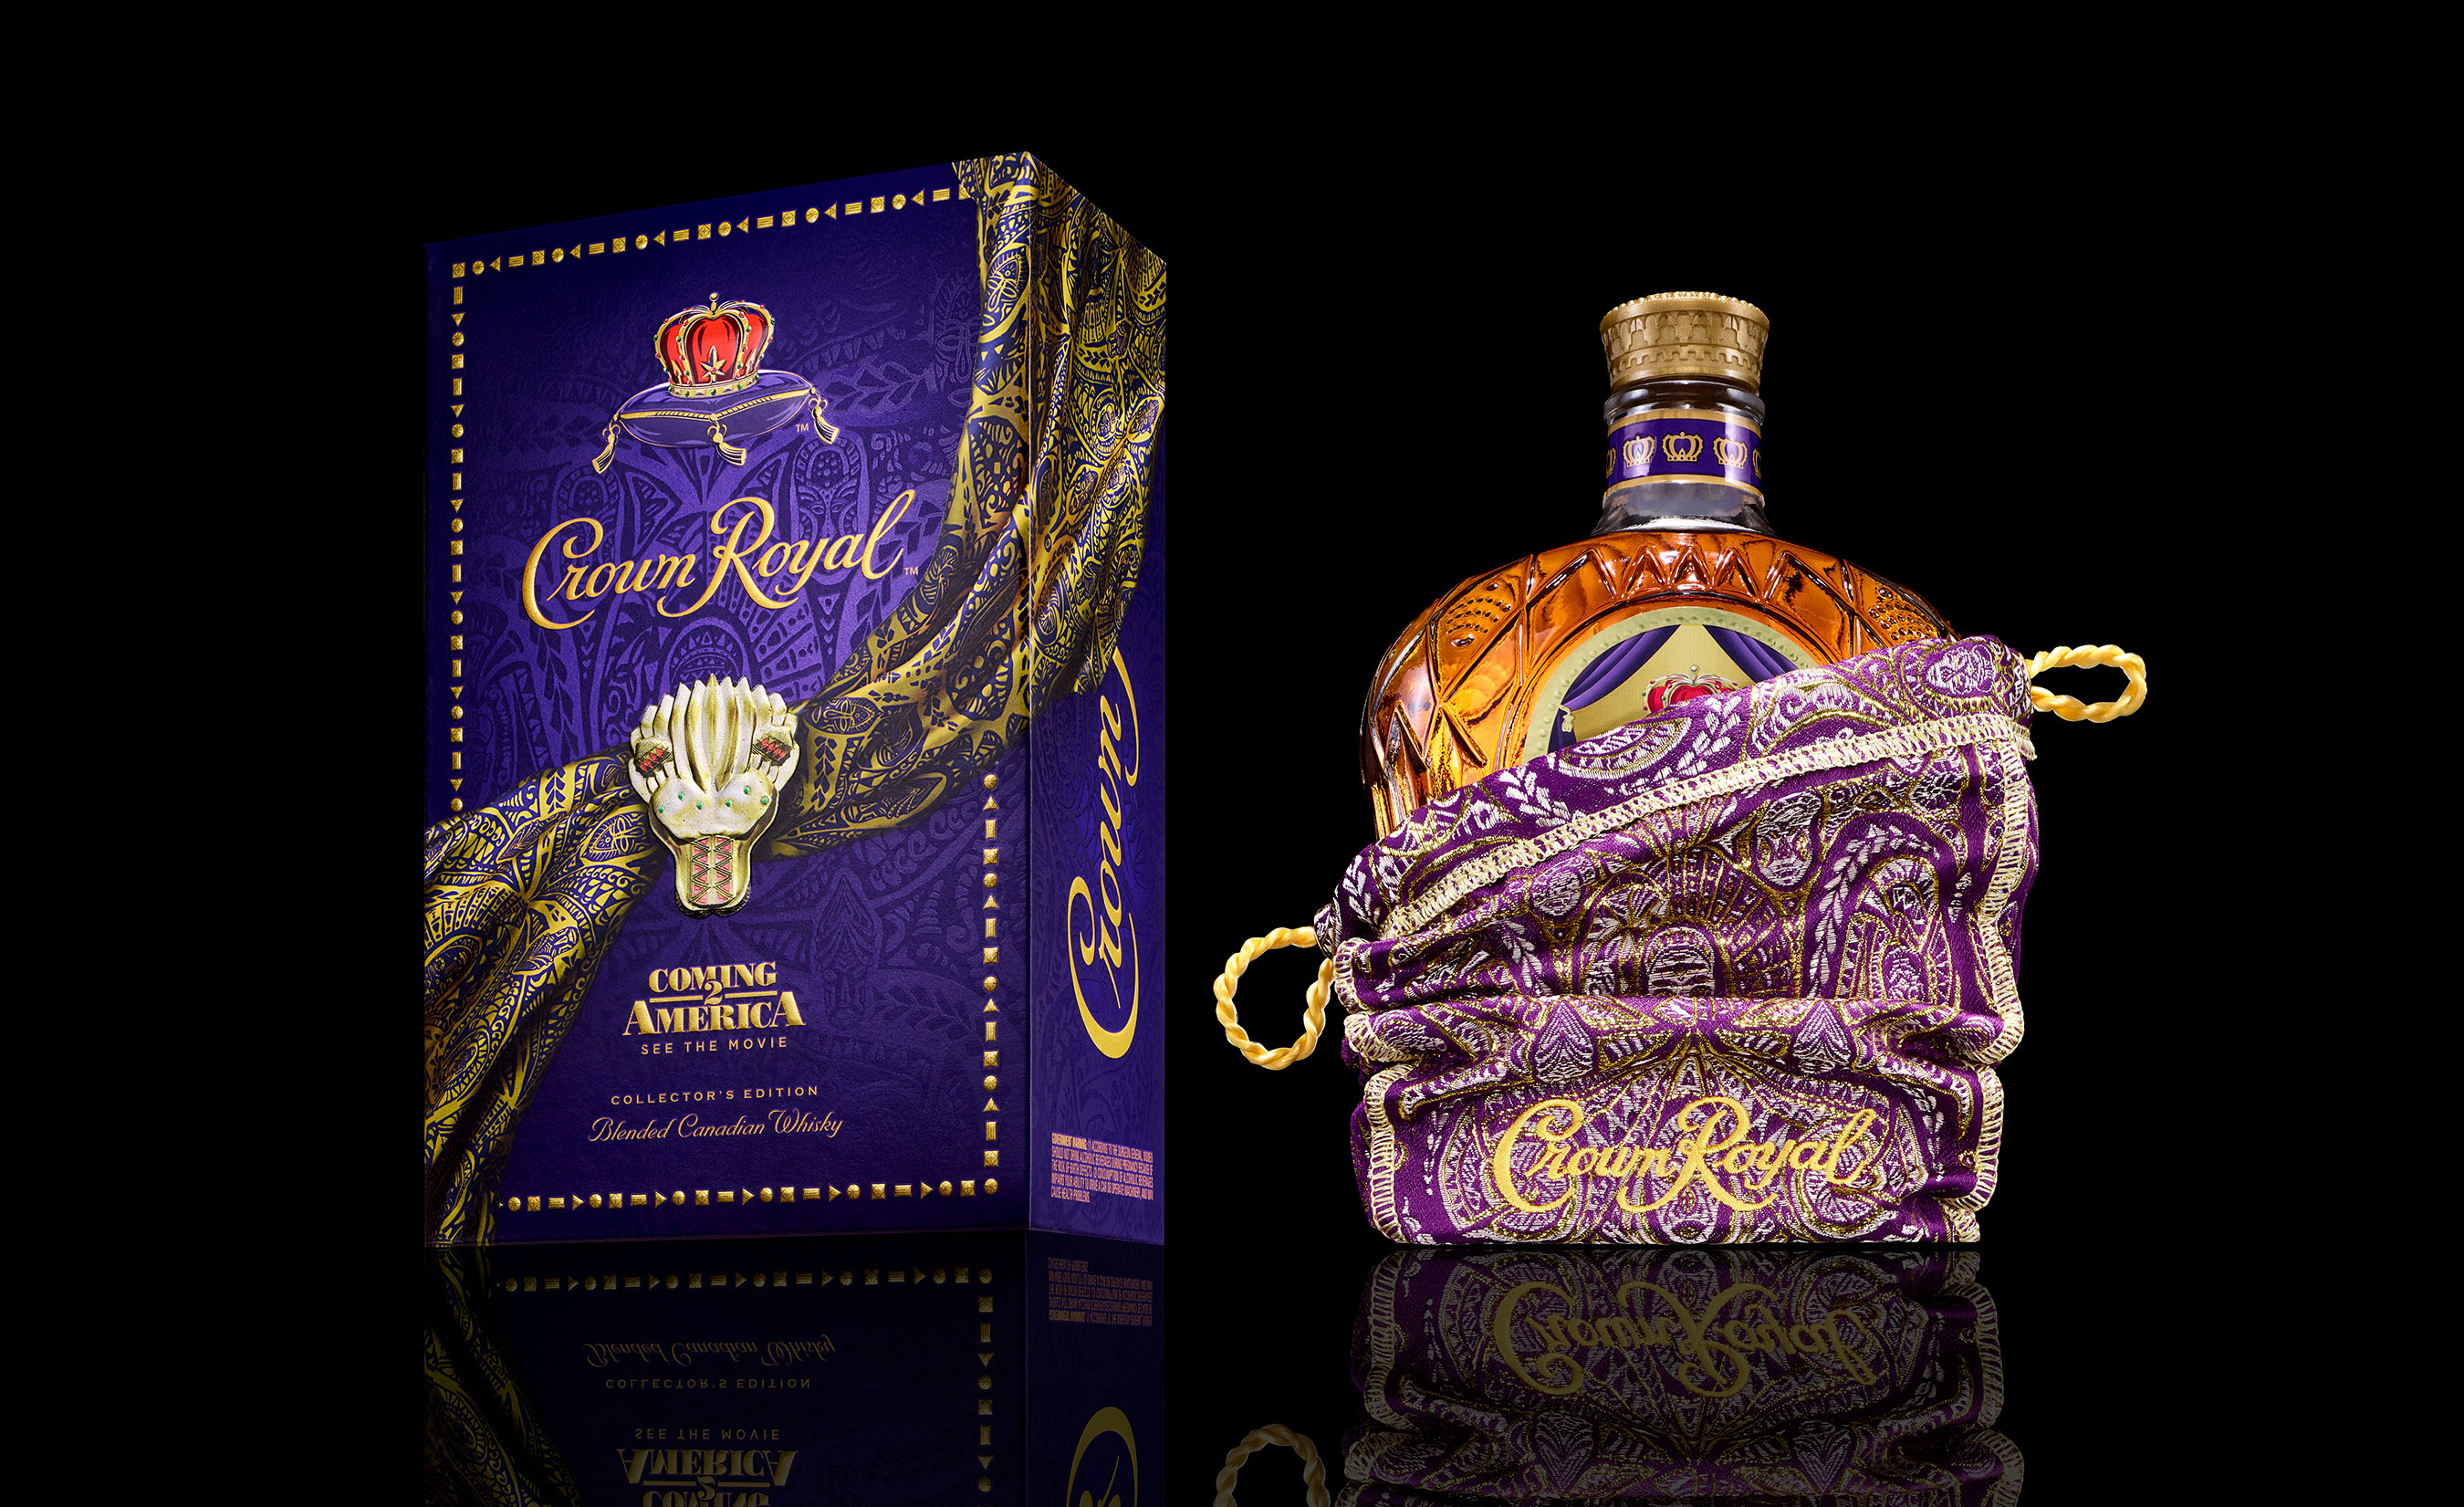 Crown Royal Collector's edition Coming 2 America packaging and purple + gold stitched bag designed by Ruth E. Carter.